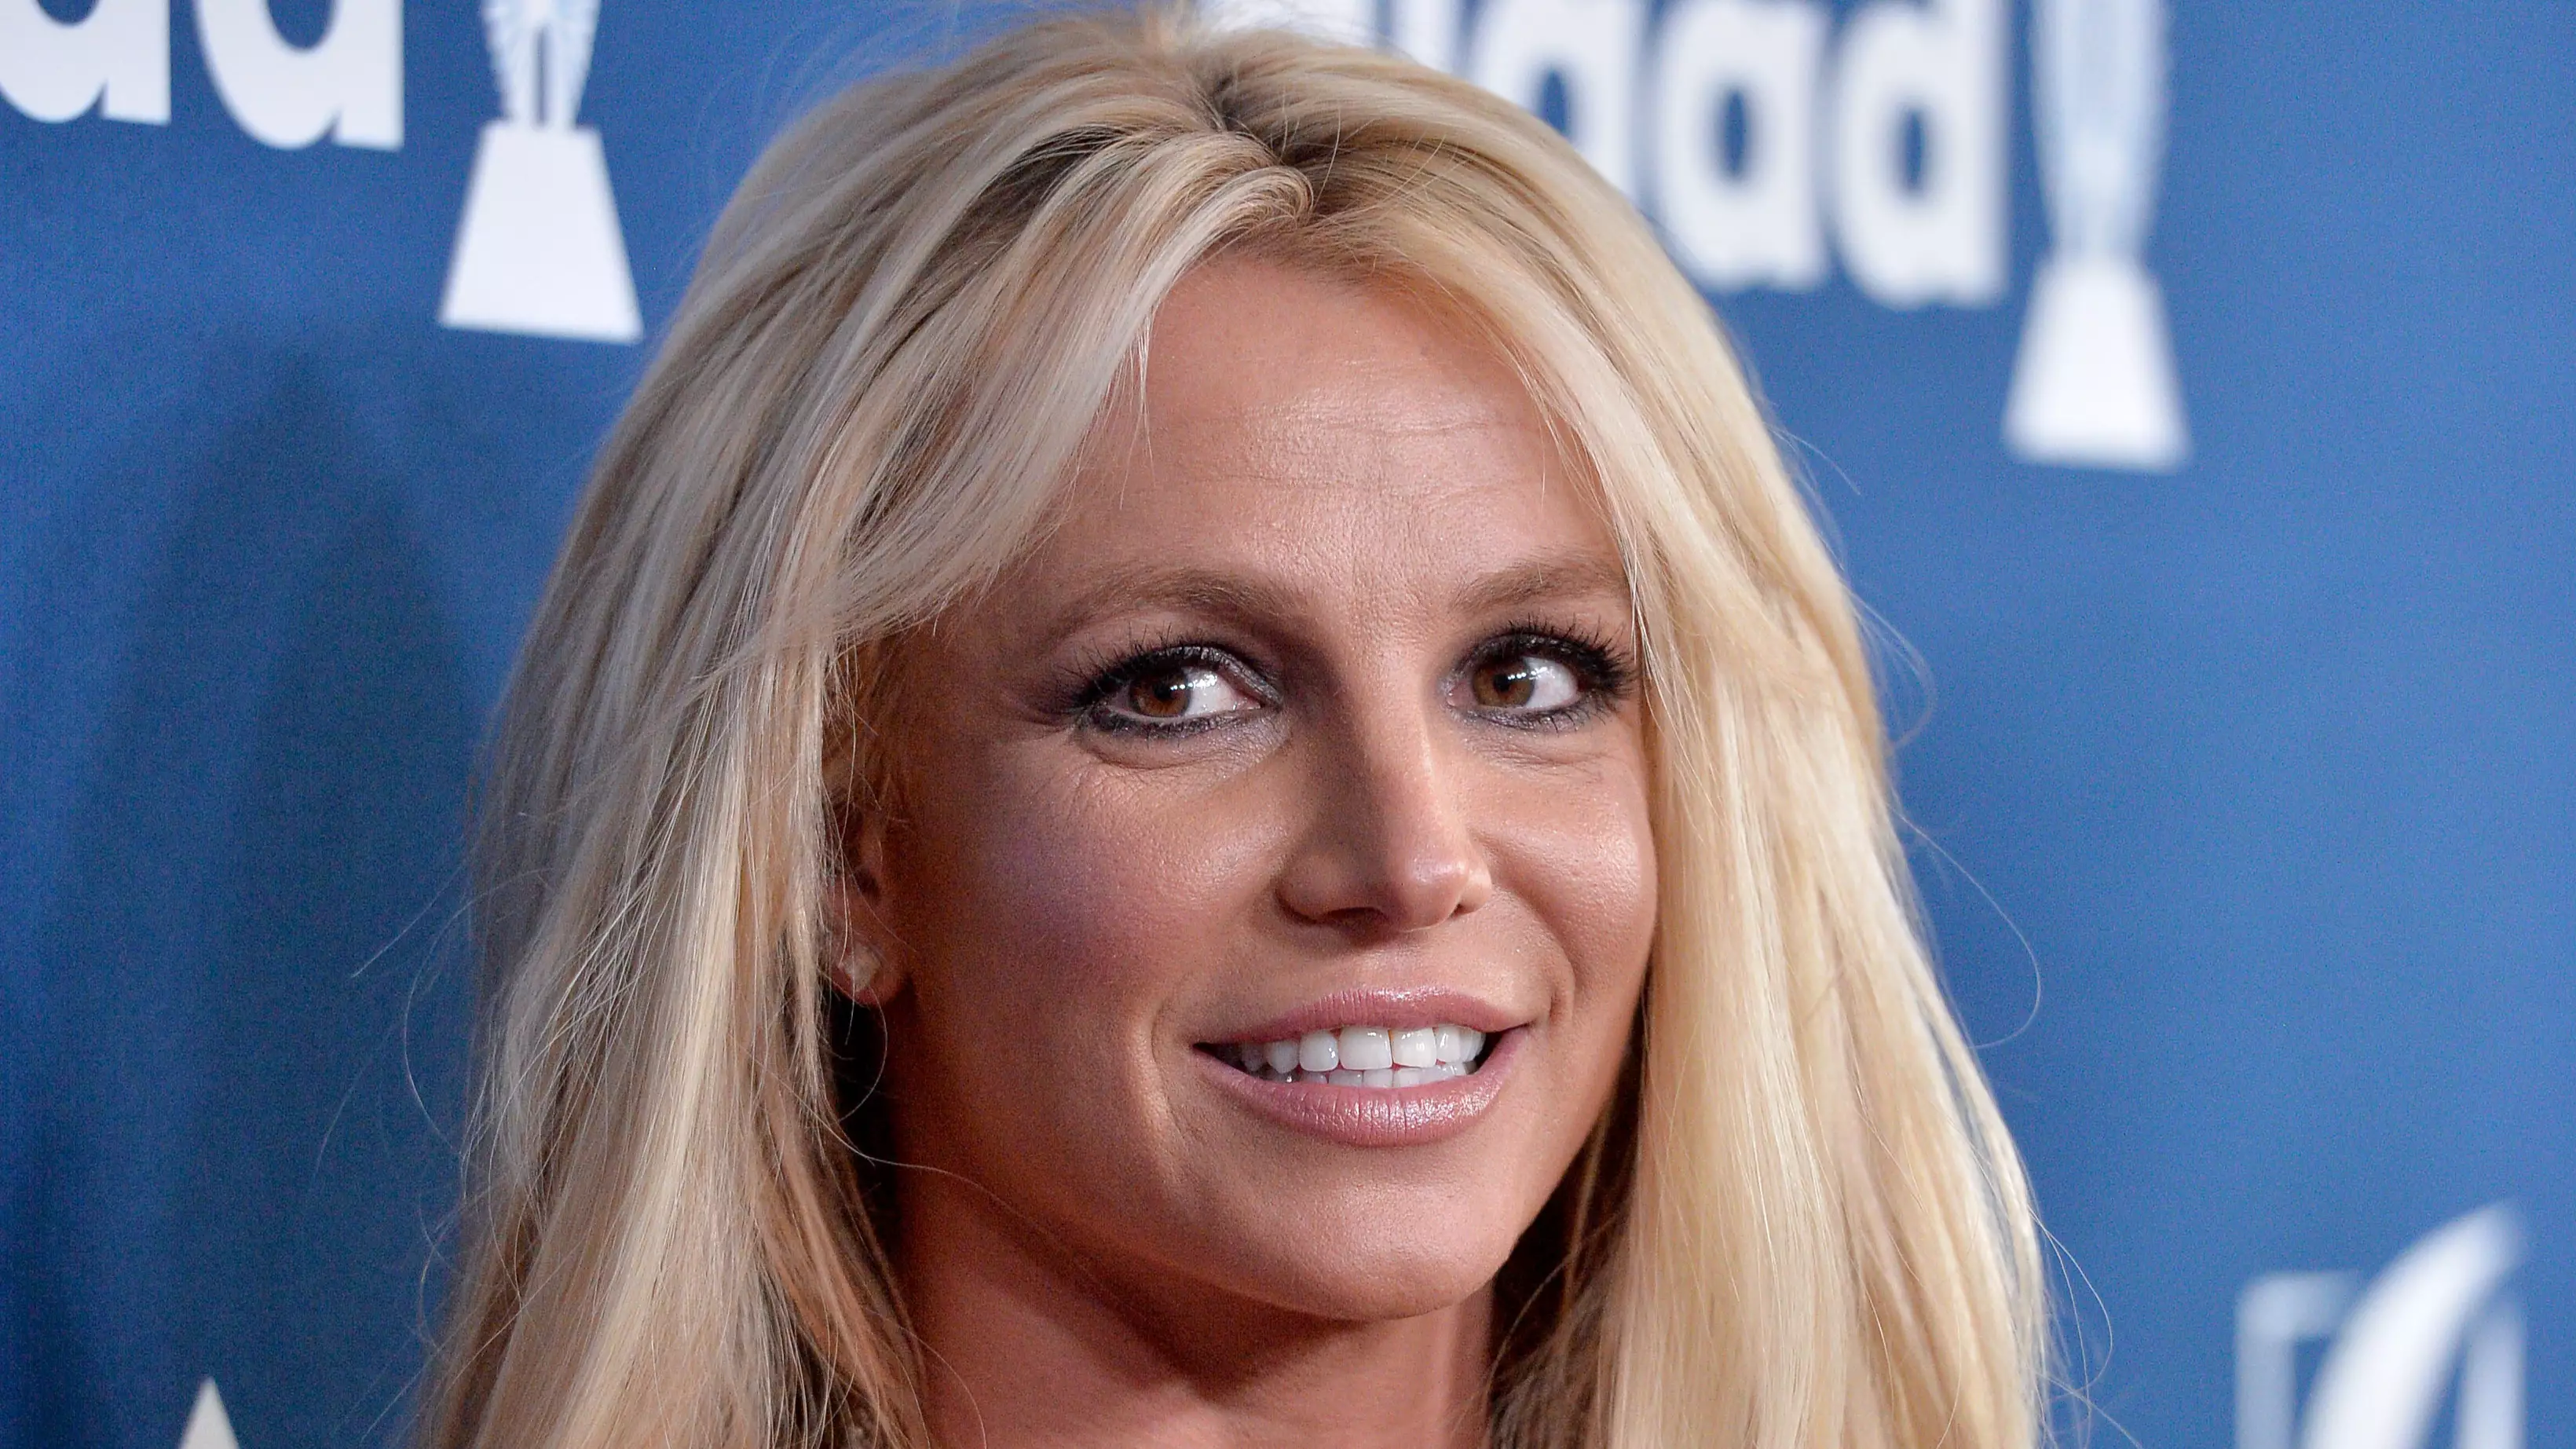 A New Documentary About The Free Britney Movement Is Airing Next Month